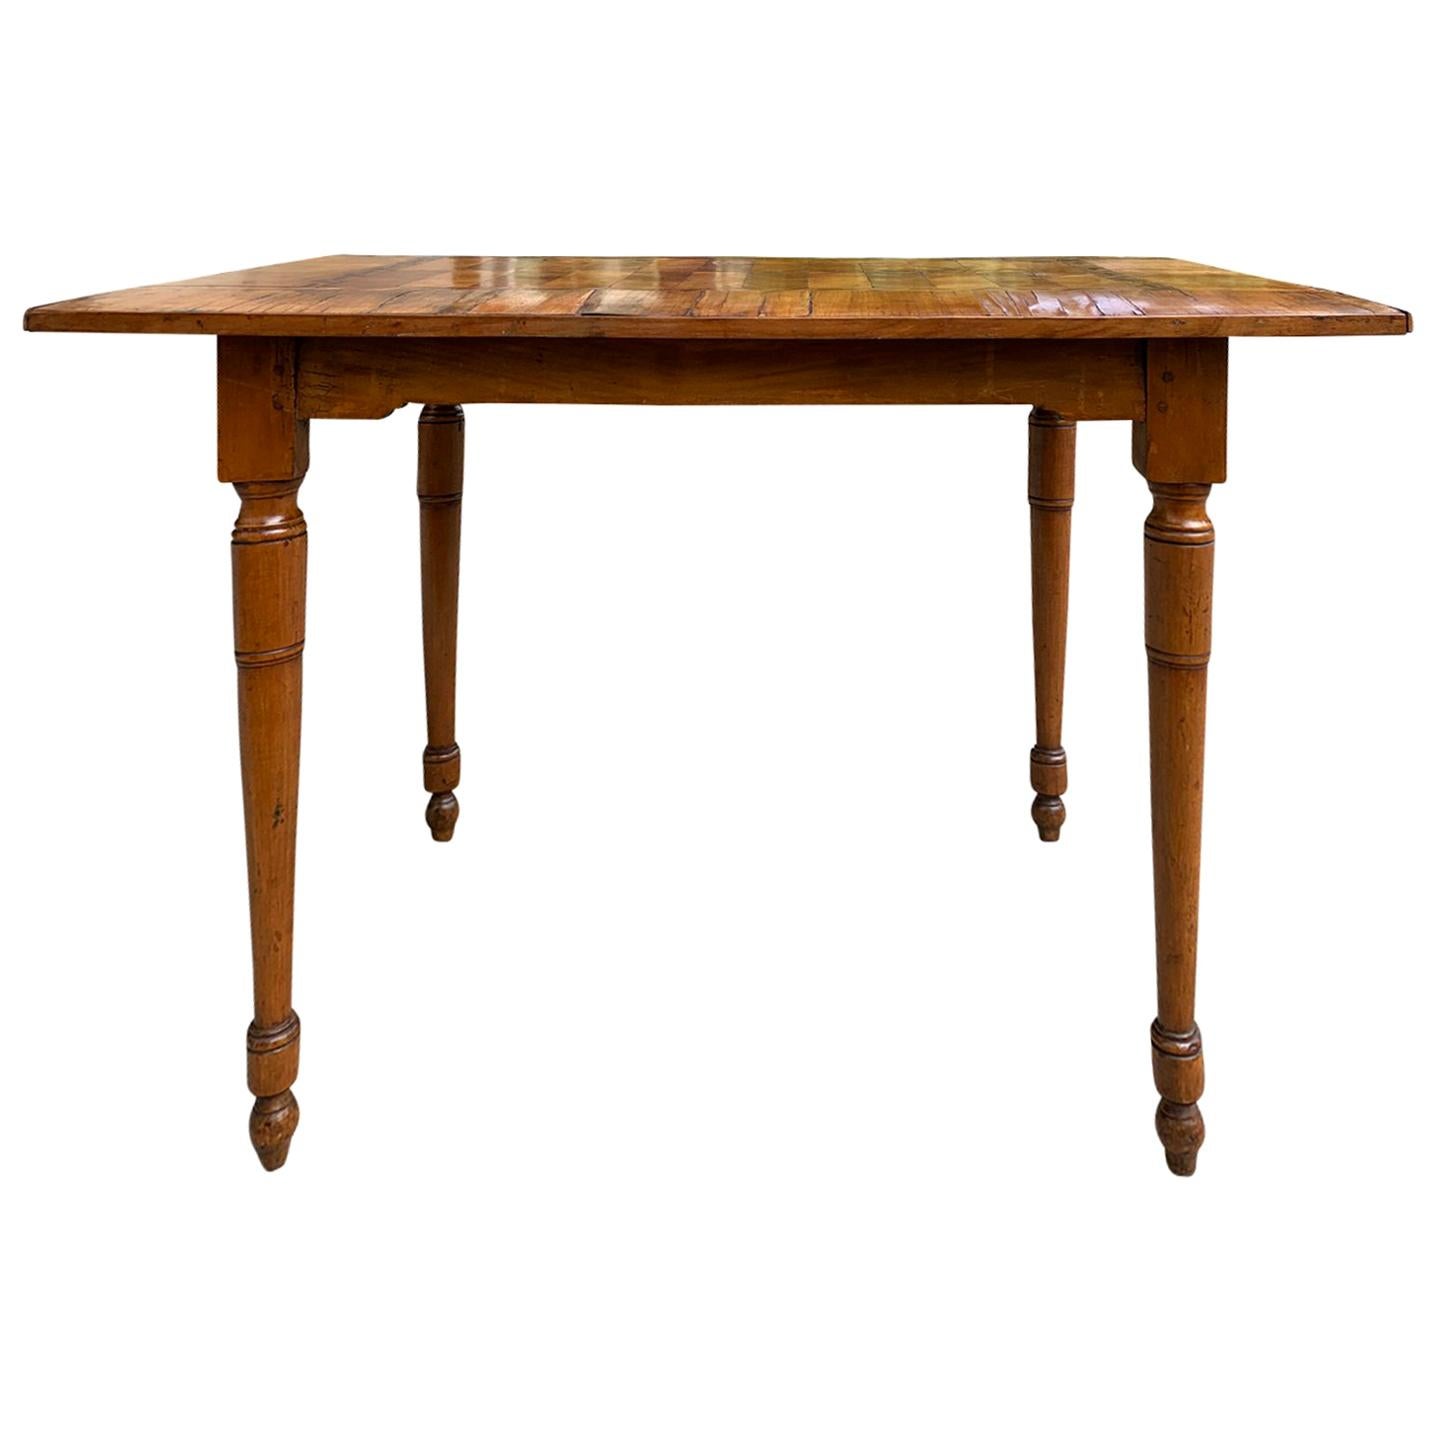 18th-19th Century Italian Parquetry Top Table For Sale